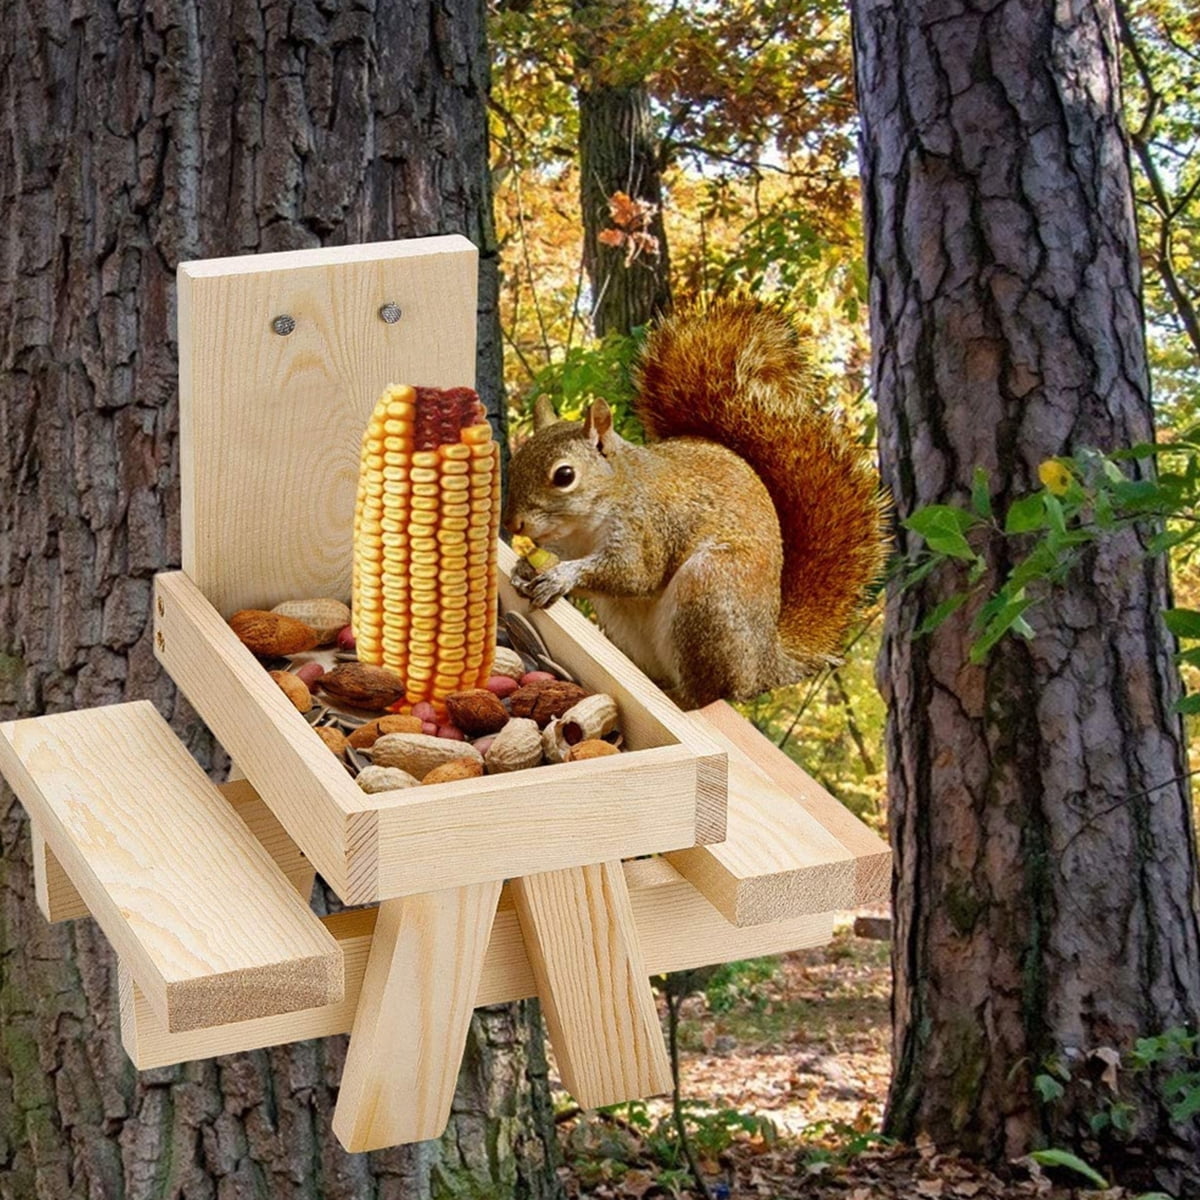 or Fence Mount Idea Outside Squirrel and Chipmunk Feeder with Corn Cob Holder Made in USA with Premium Cedar Wood| Entertaining for Tree Collins Woodworks Squirrel Picnic Table Feeder Deck 